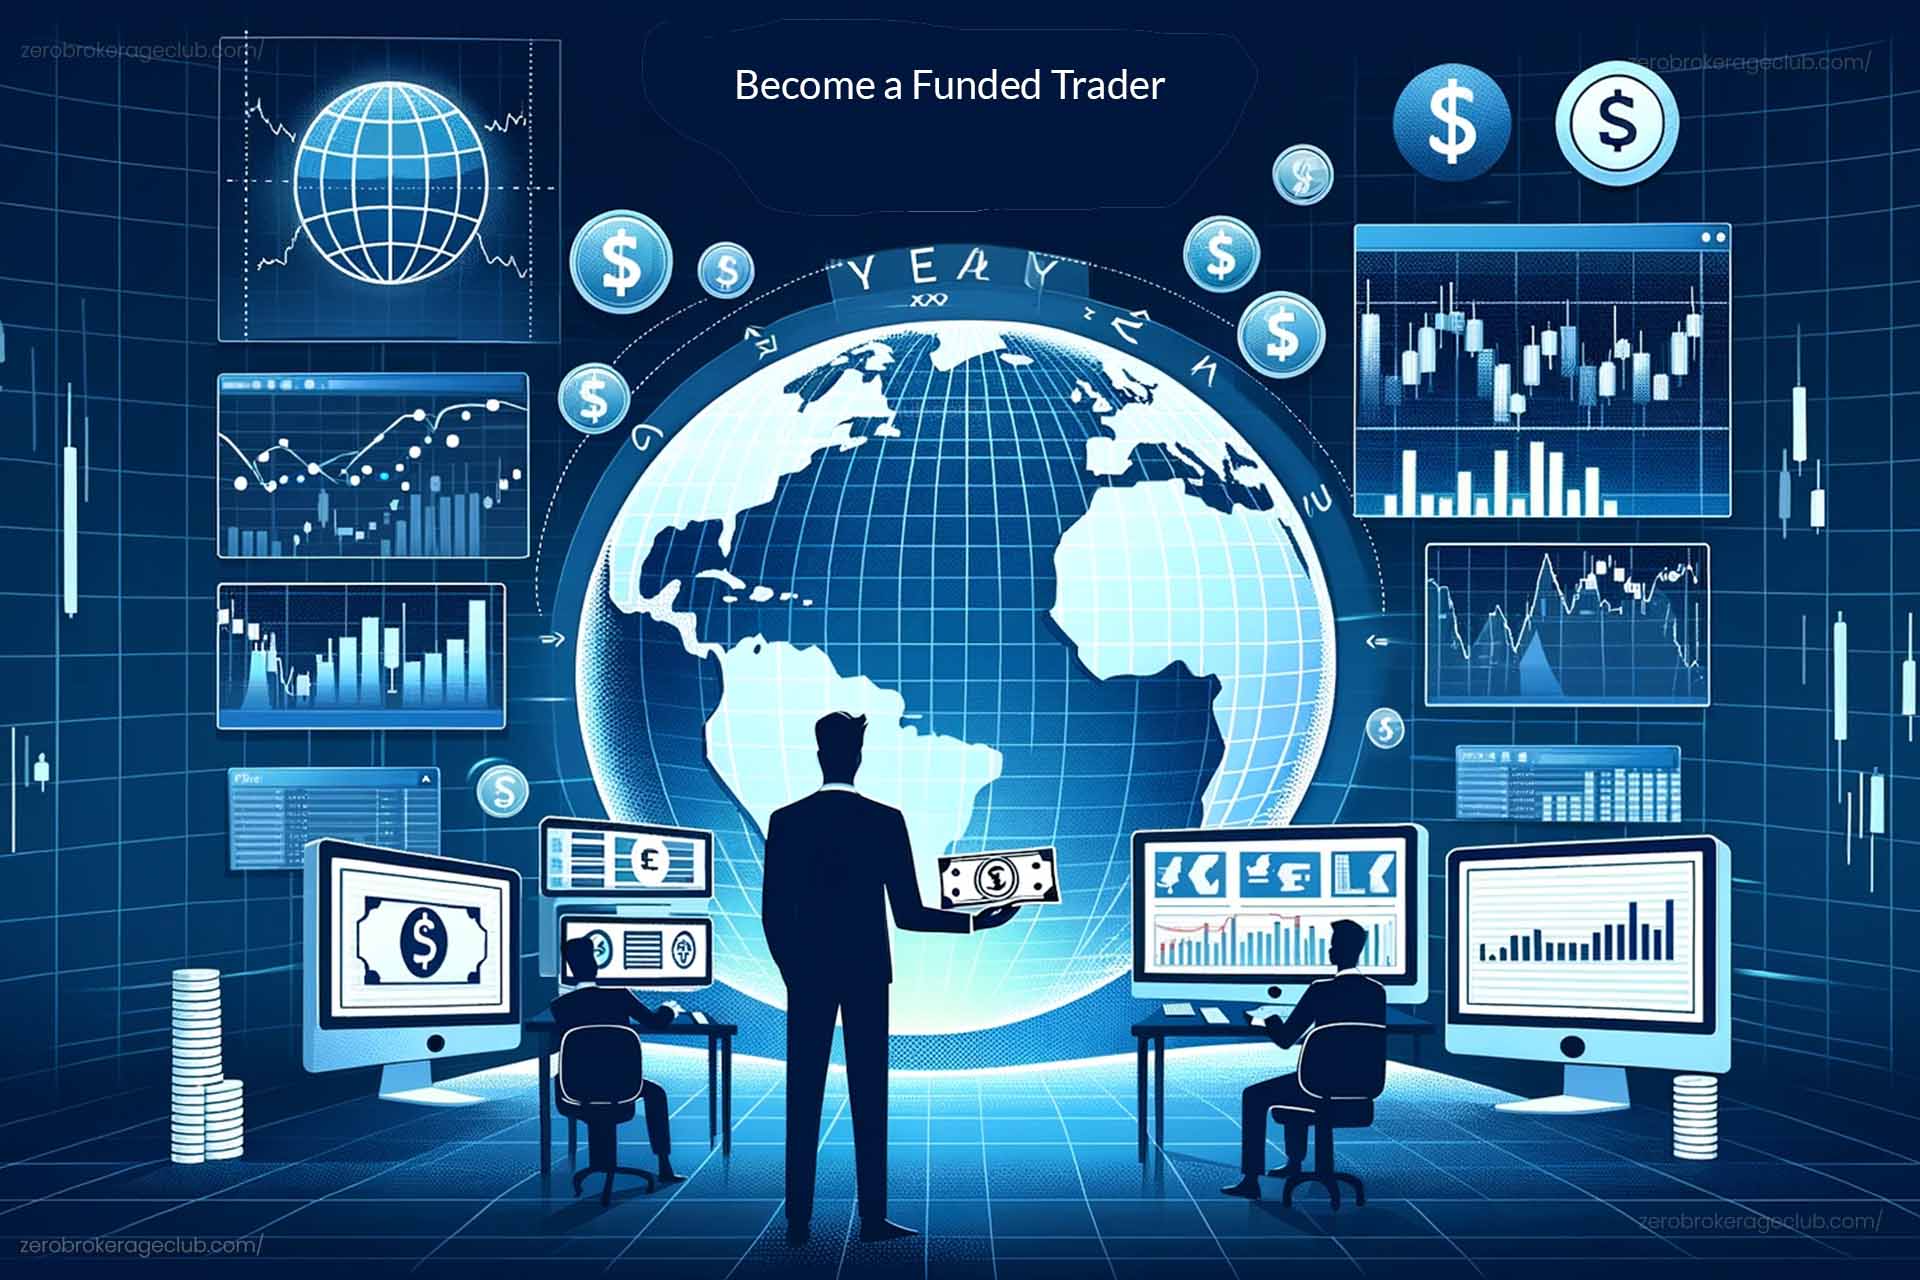 Is it Hard to Become a Funded Trader?